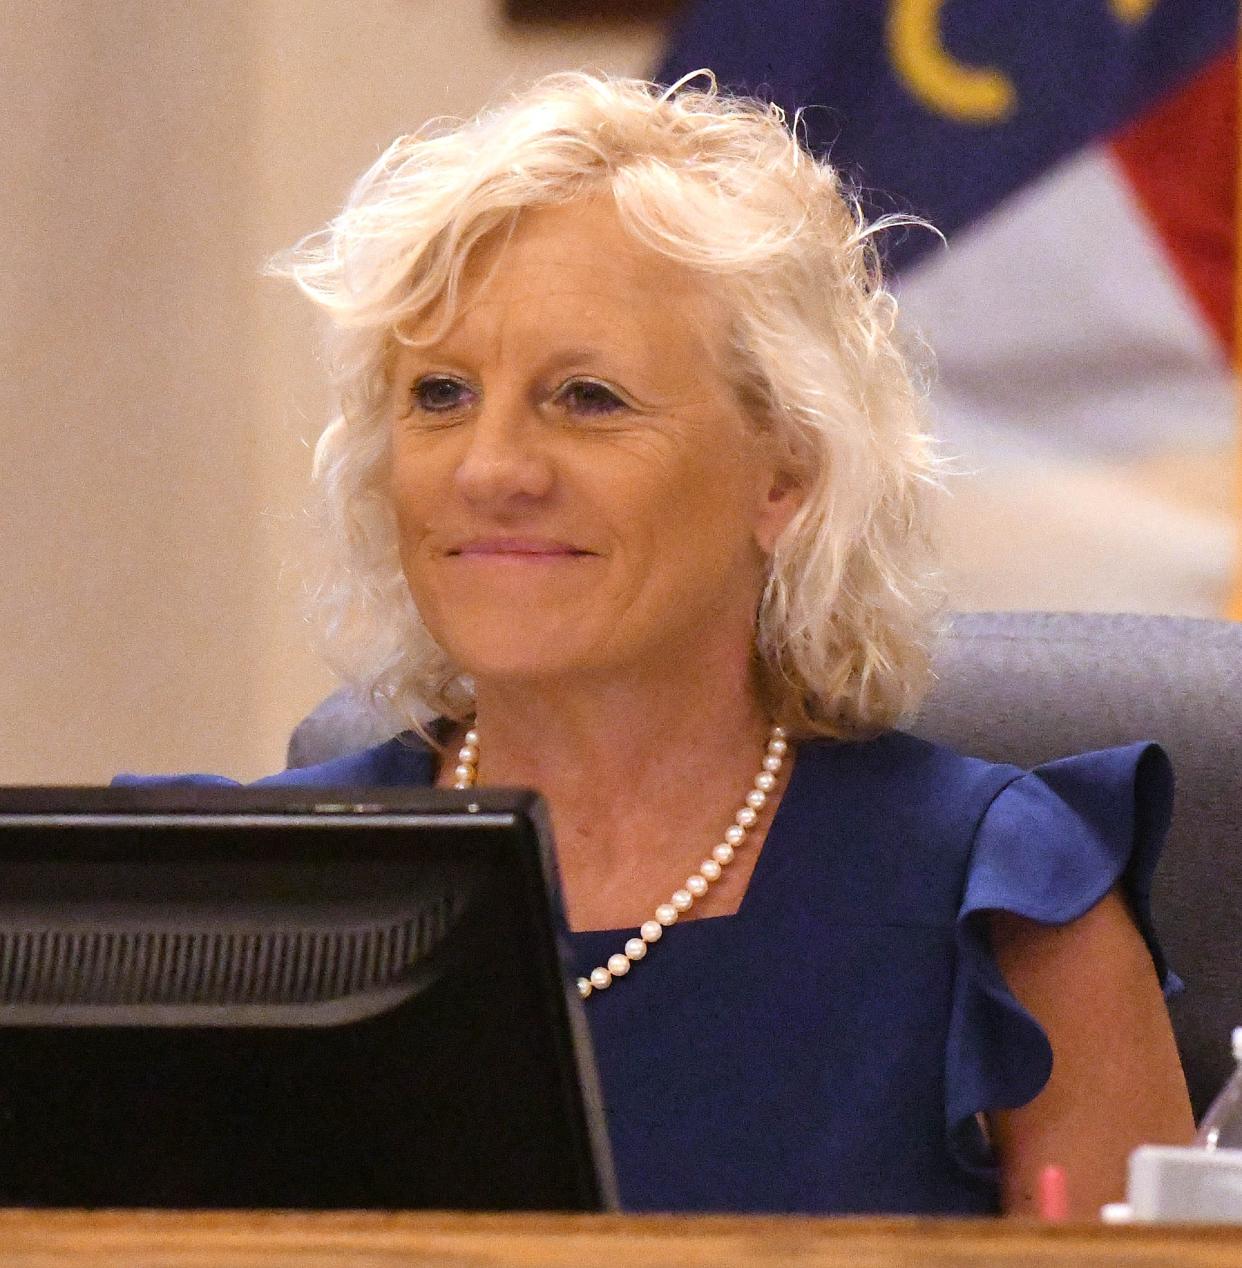 A Wake County judge agreed to lift an order for the arrest of Julia Olson-Boseman, chair of the New Hanover County Board of Commissioners, last week.